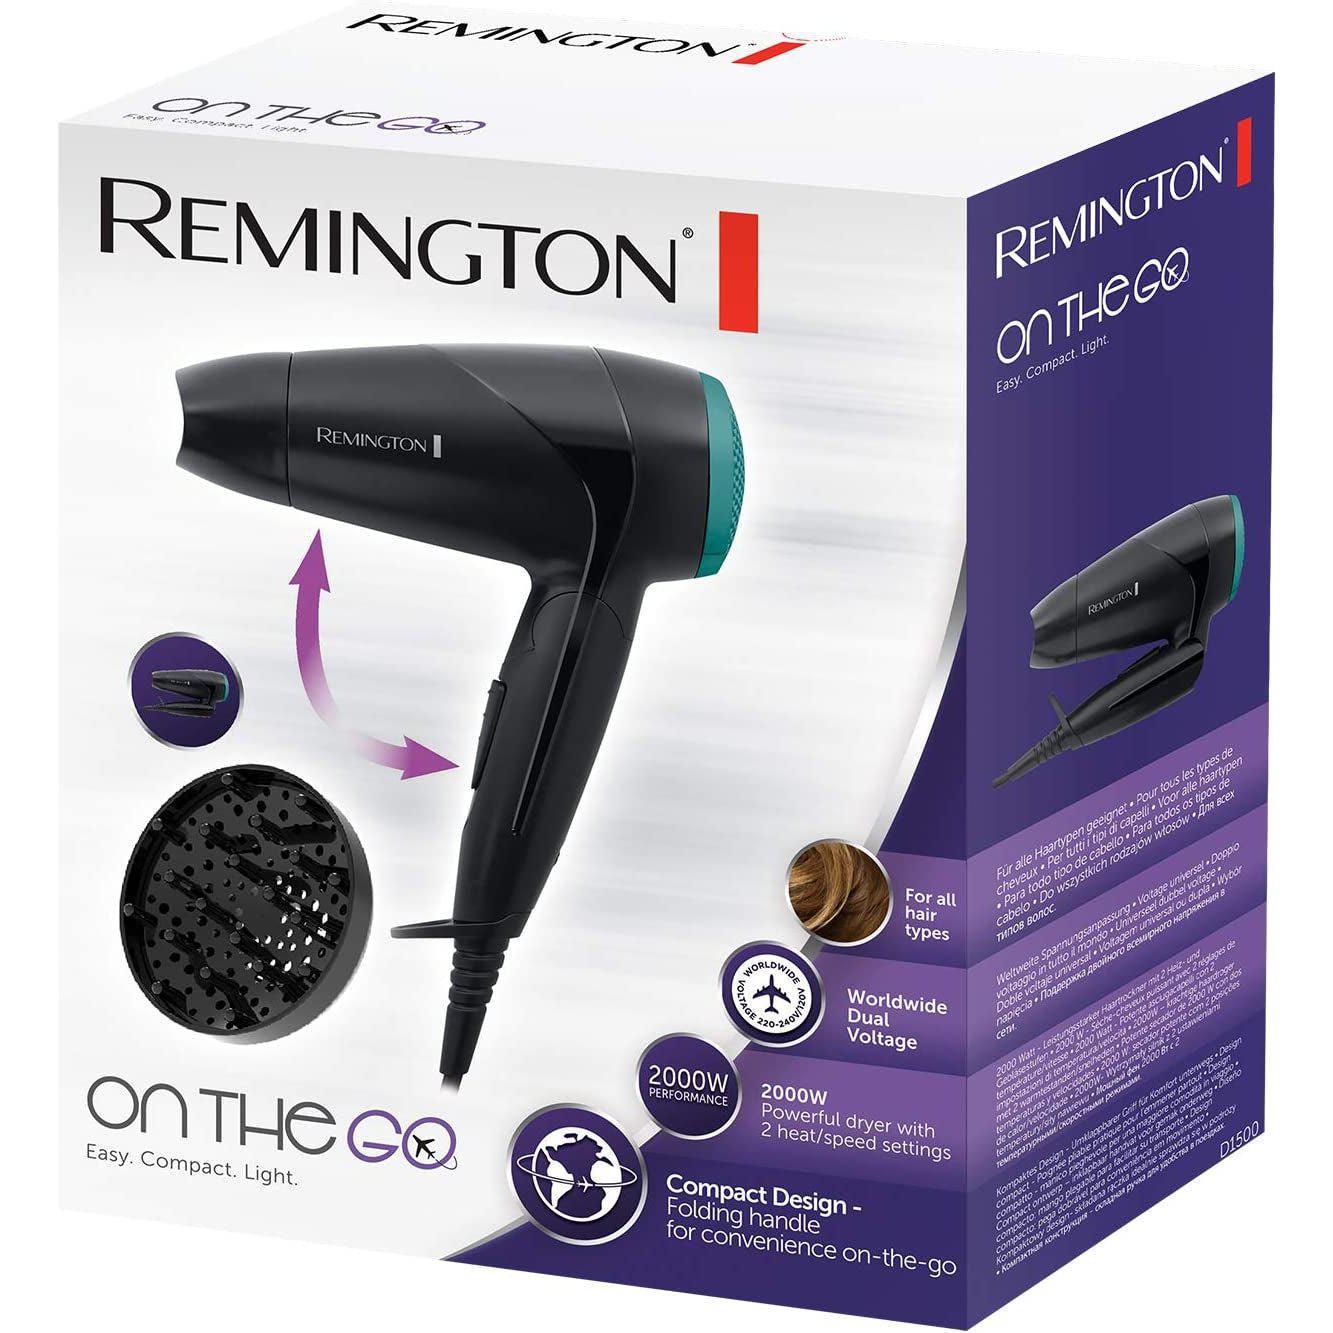 Remington Folding Travel Hairdryer with Mini Concentrator and Diffuser, Worldwide Voltage - D1500, Black - Healthxpress.ie